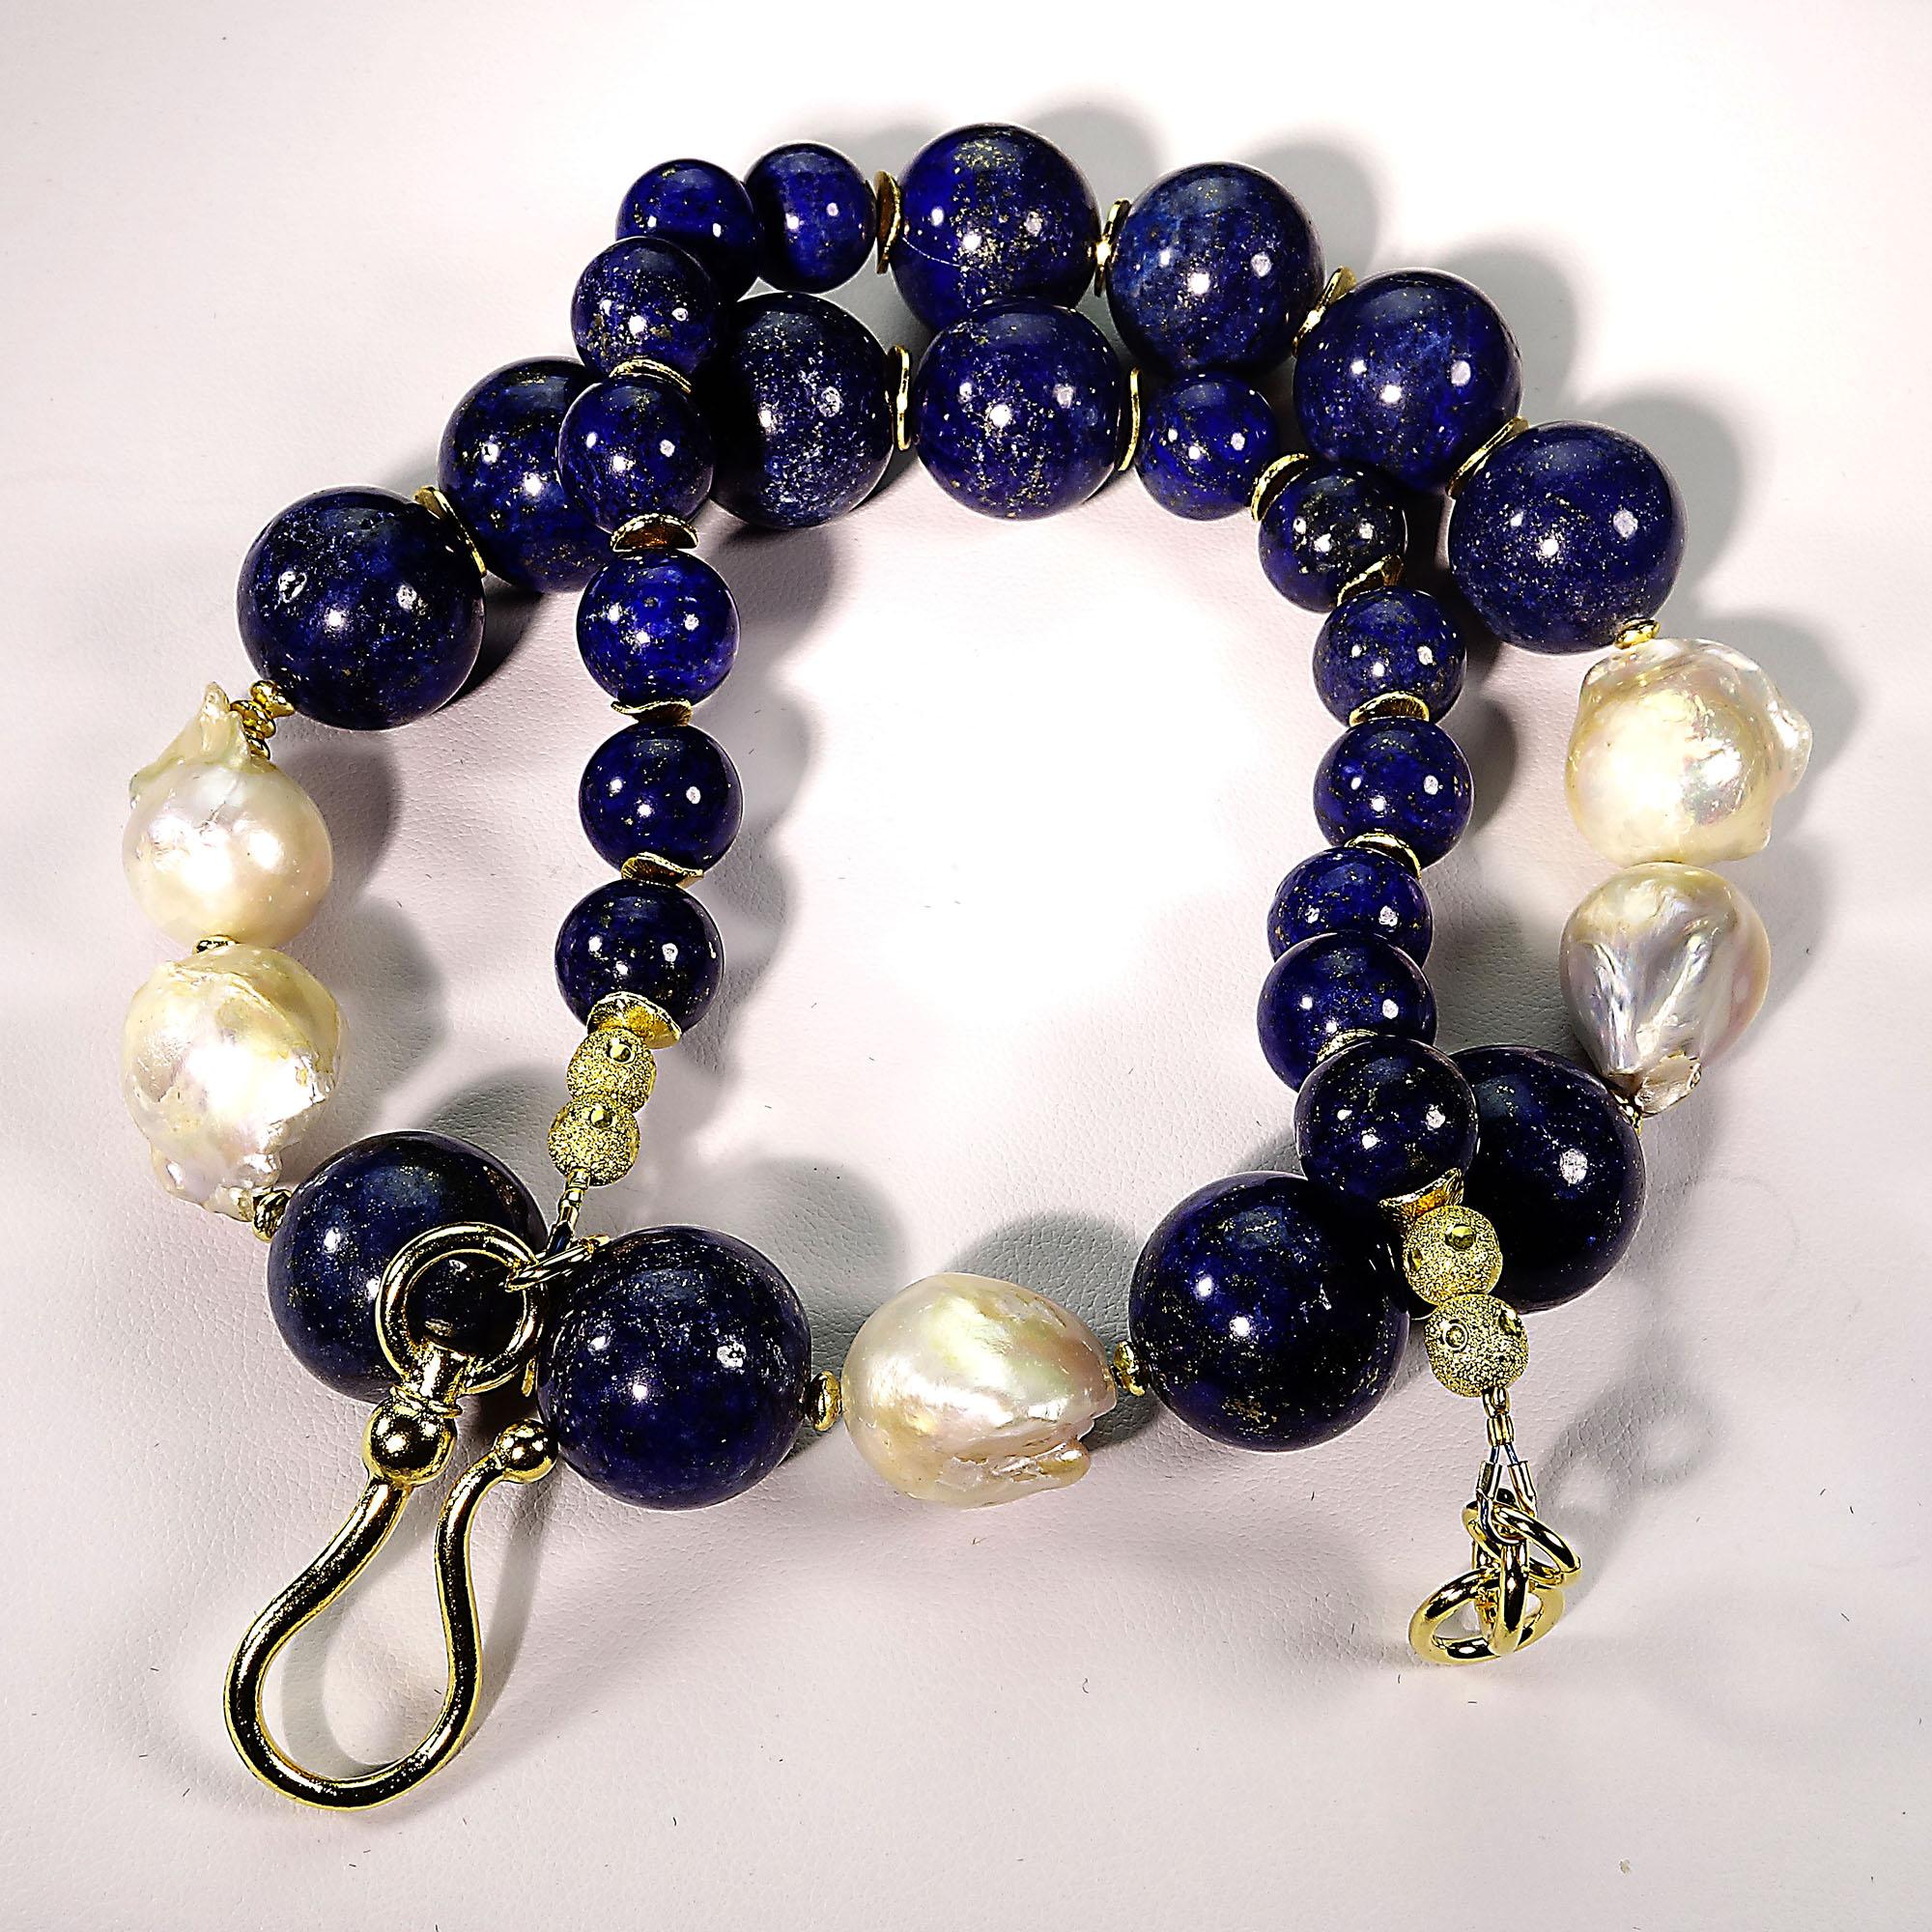 Artisan AJD 24 Inch Dramatic Blue Lapis Lazuli and White Baroque Pearl Necklace